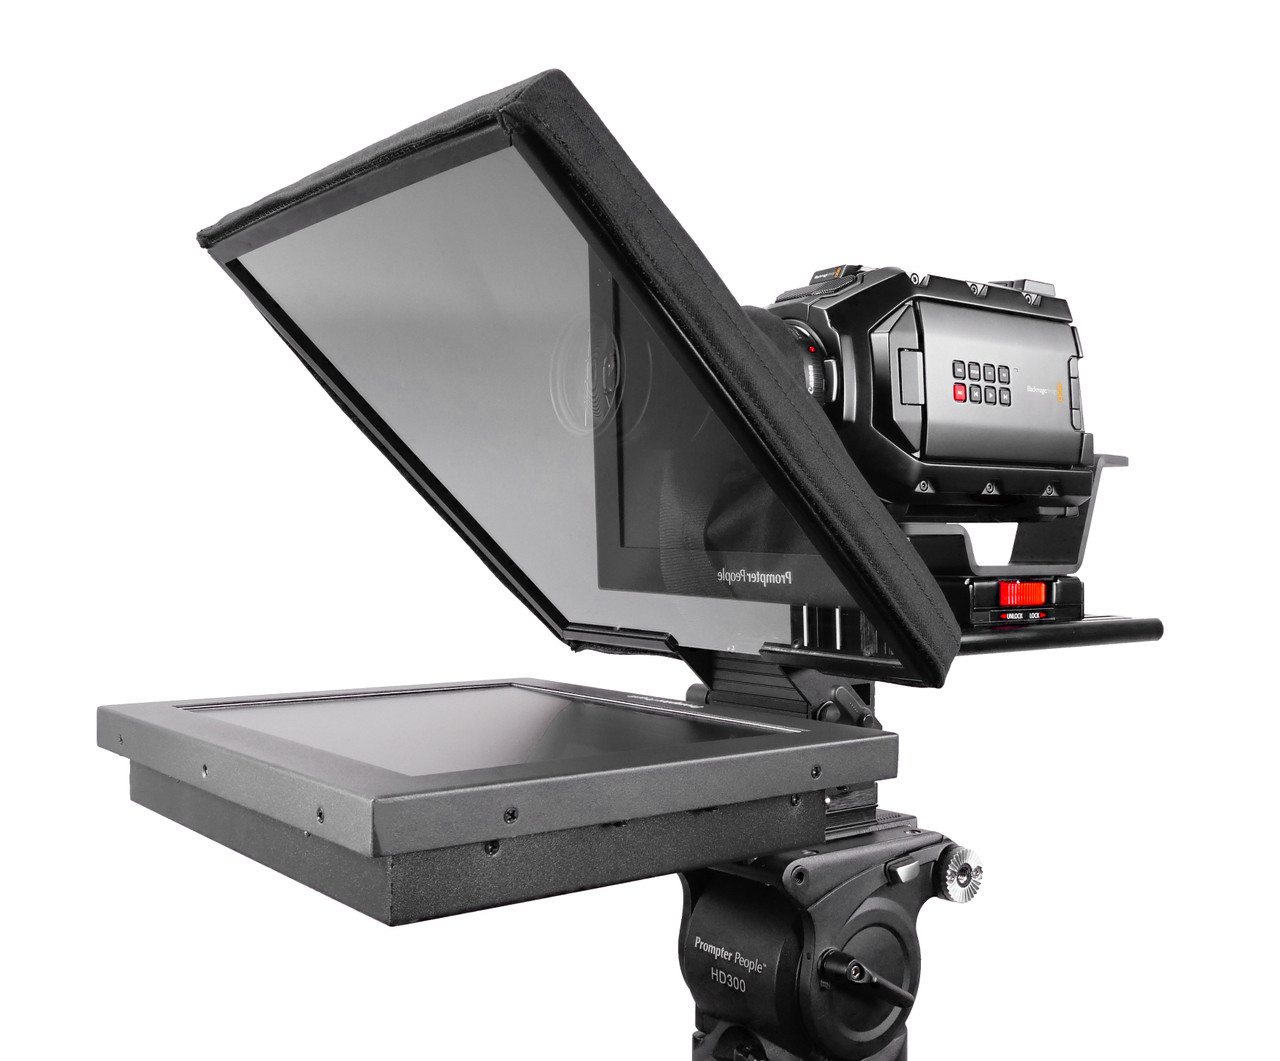 UltraFlex 12 Inch iPad Pro, HighBright 1000 NIT Monitor, and Free Teleprompter Software - Pictured with HighBright 12" Monitor - Angled